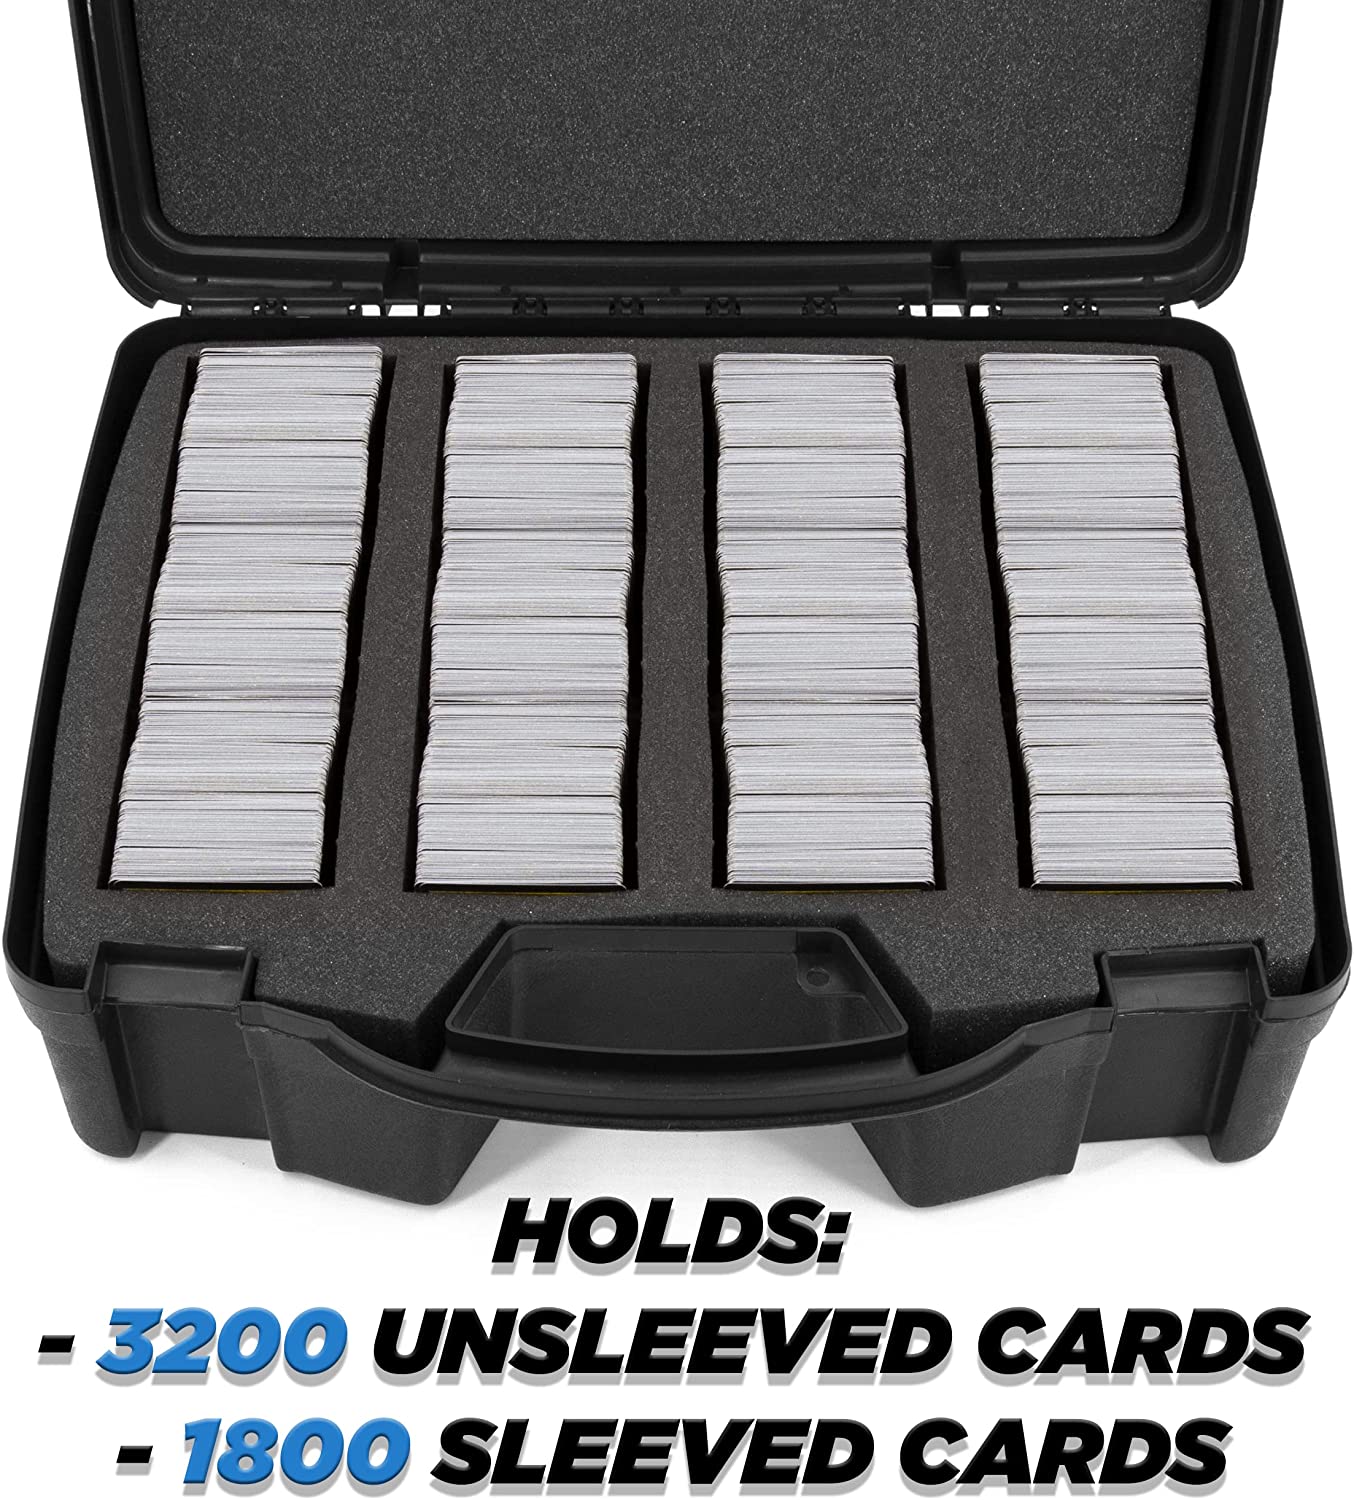 CASEMATIX Trading Card Case and Card Game Organizer for 3200 Cards